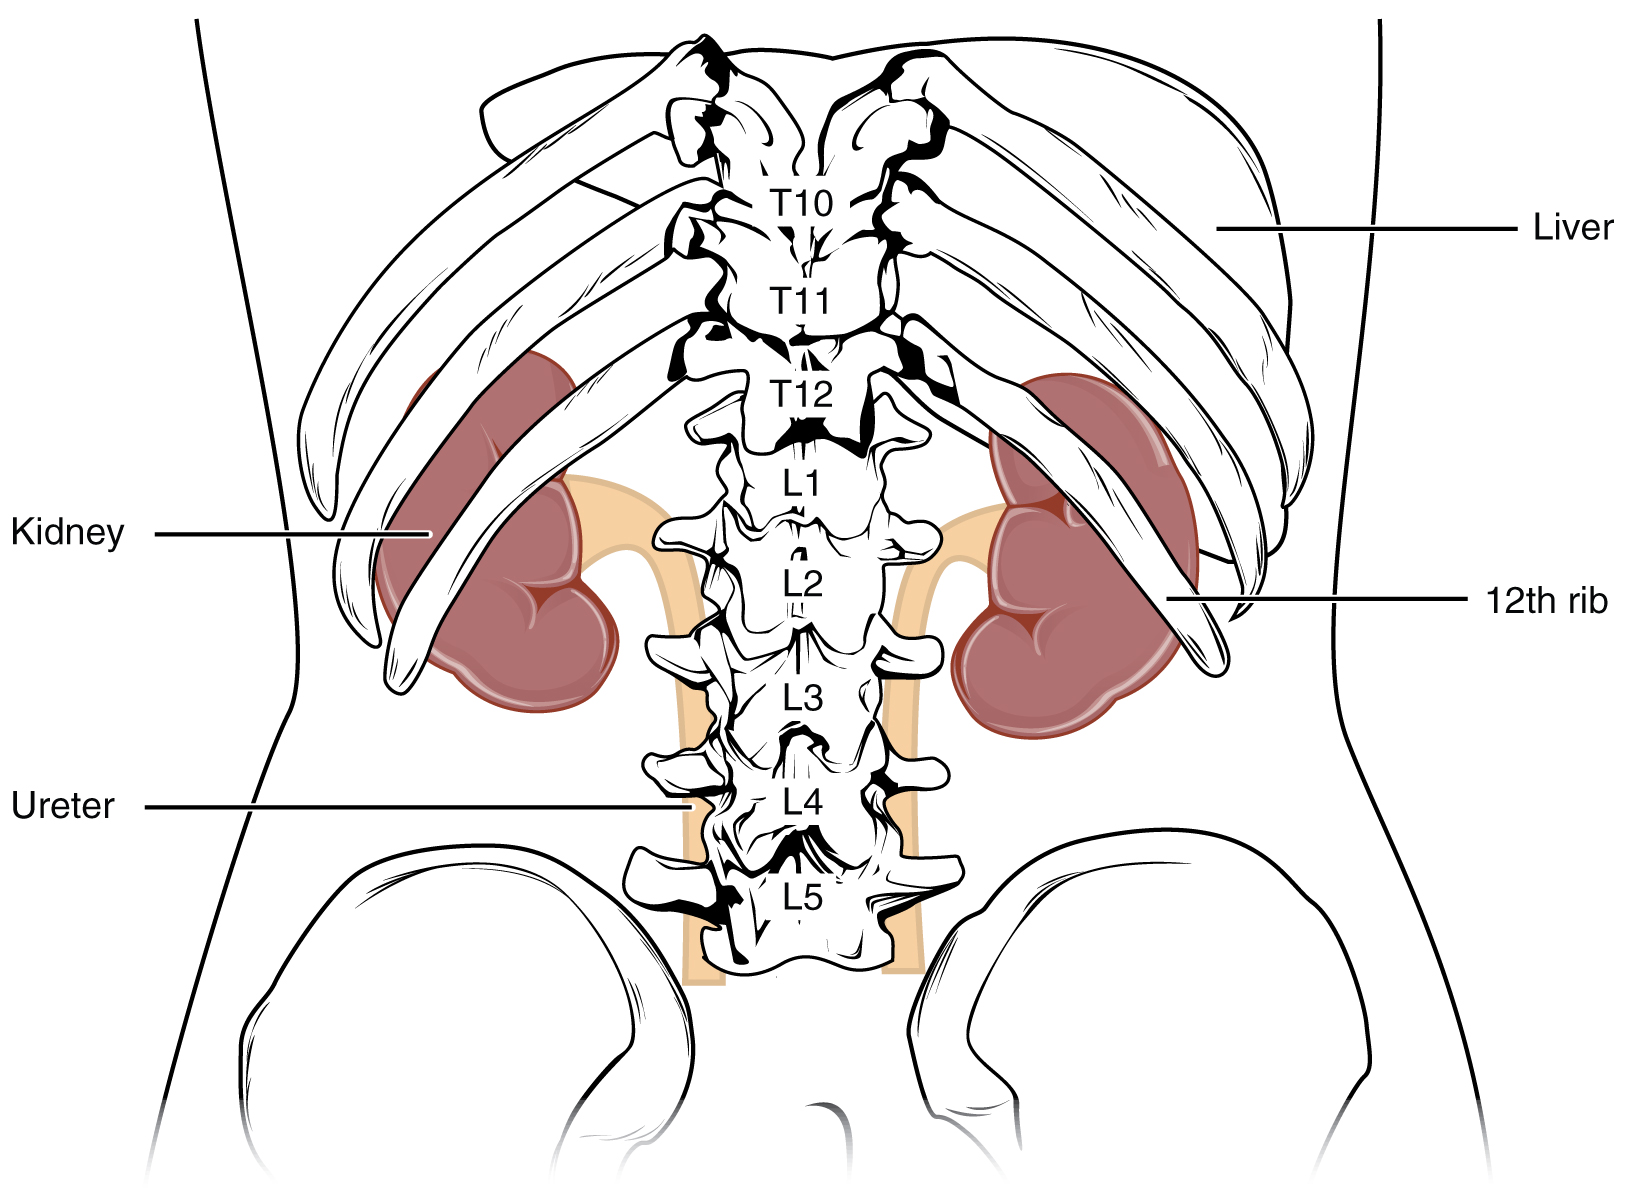 Diagram of a human torso showing the location of the kidneys within the torso.